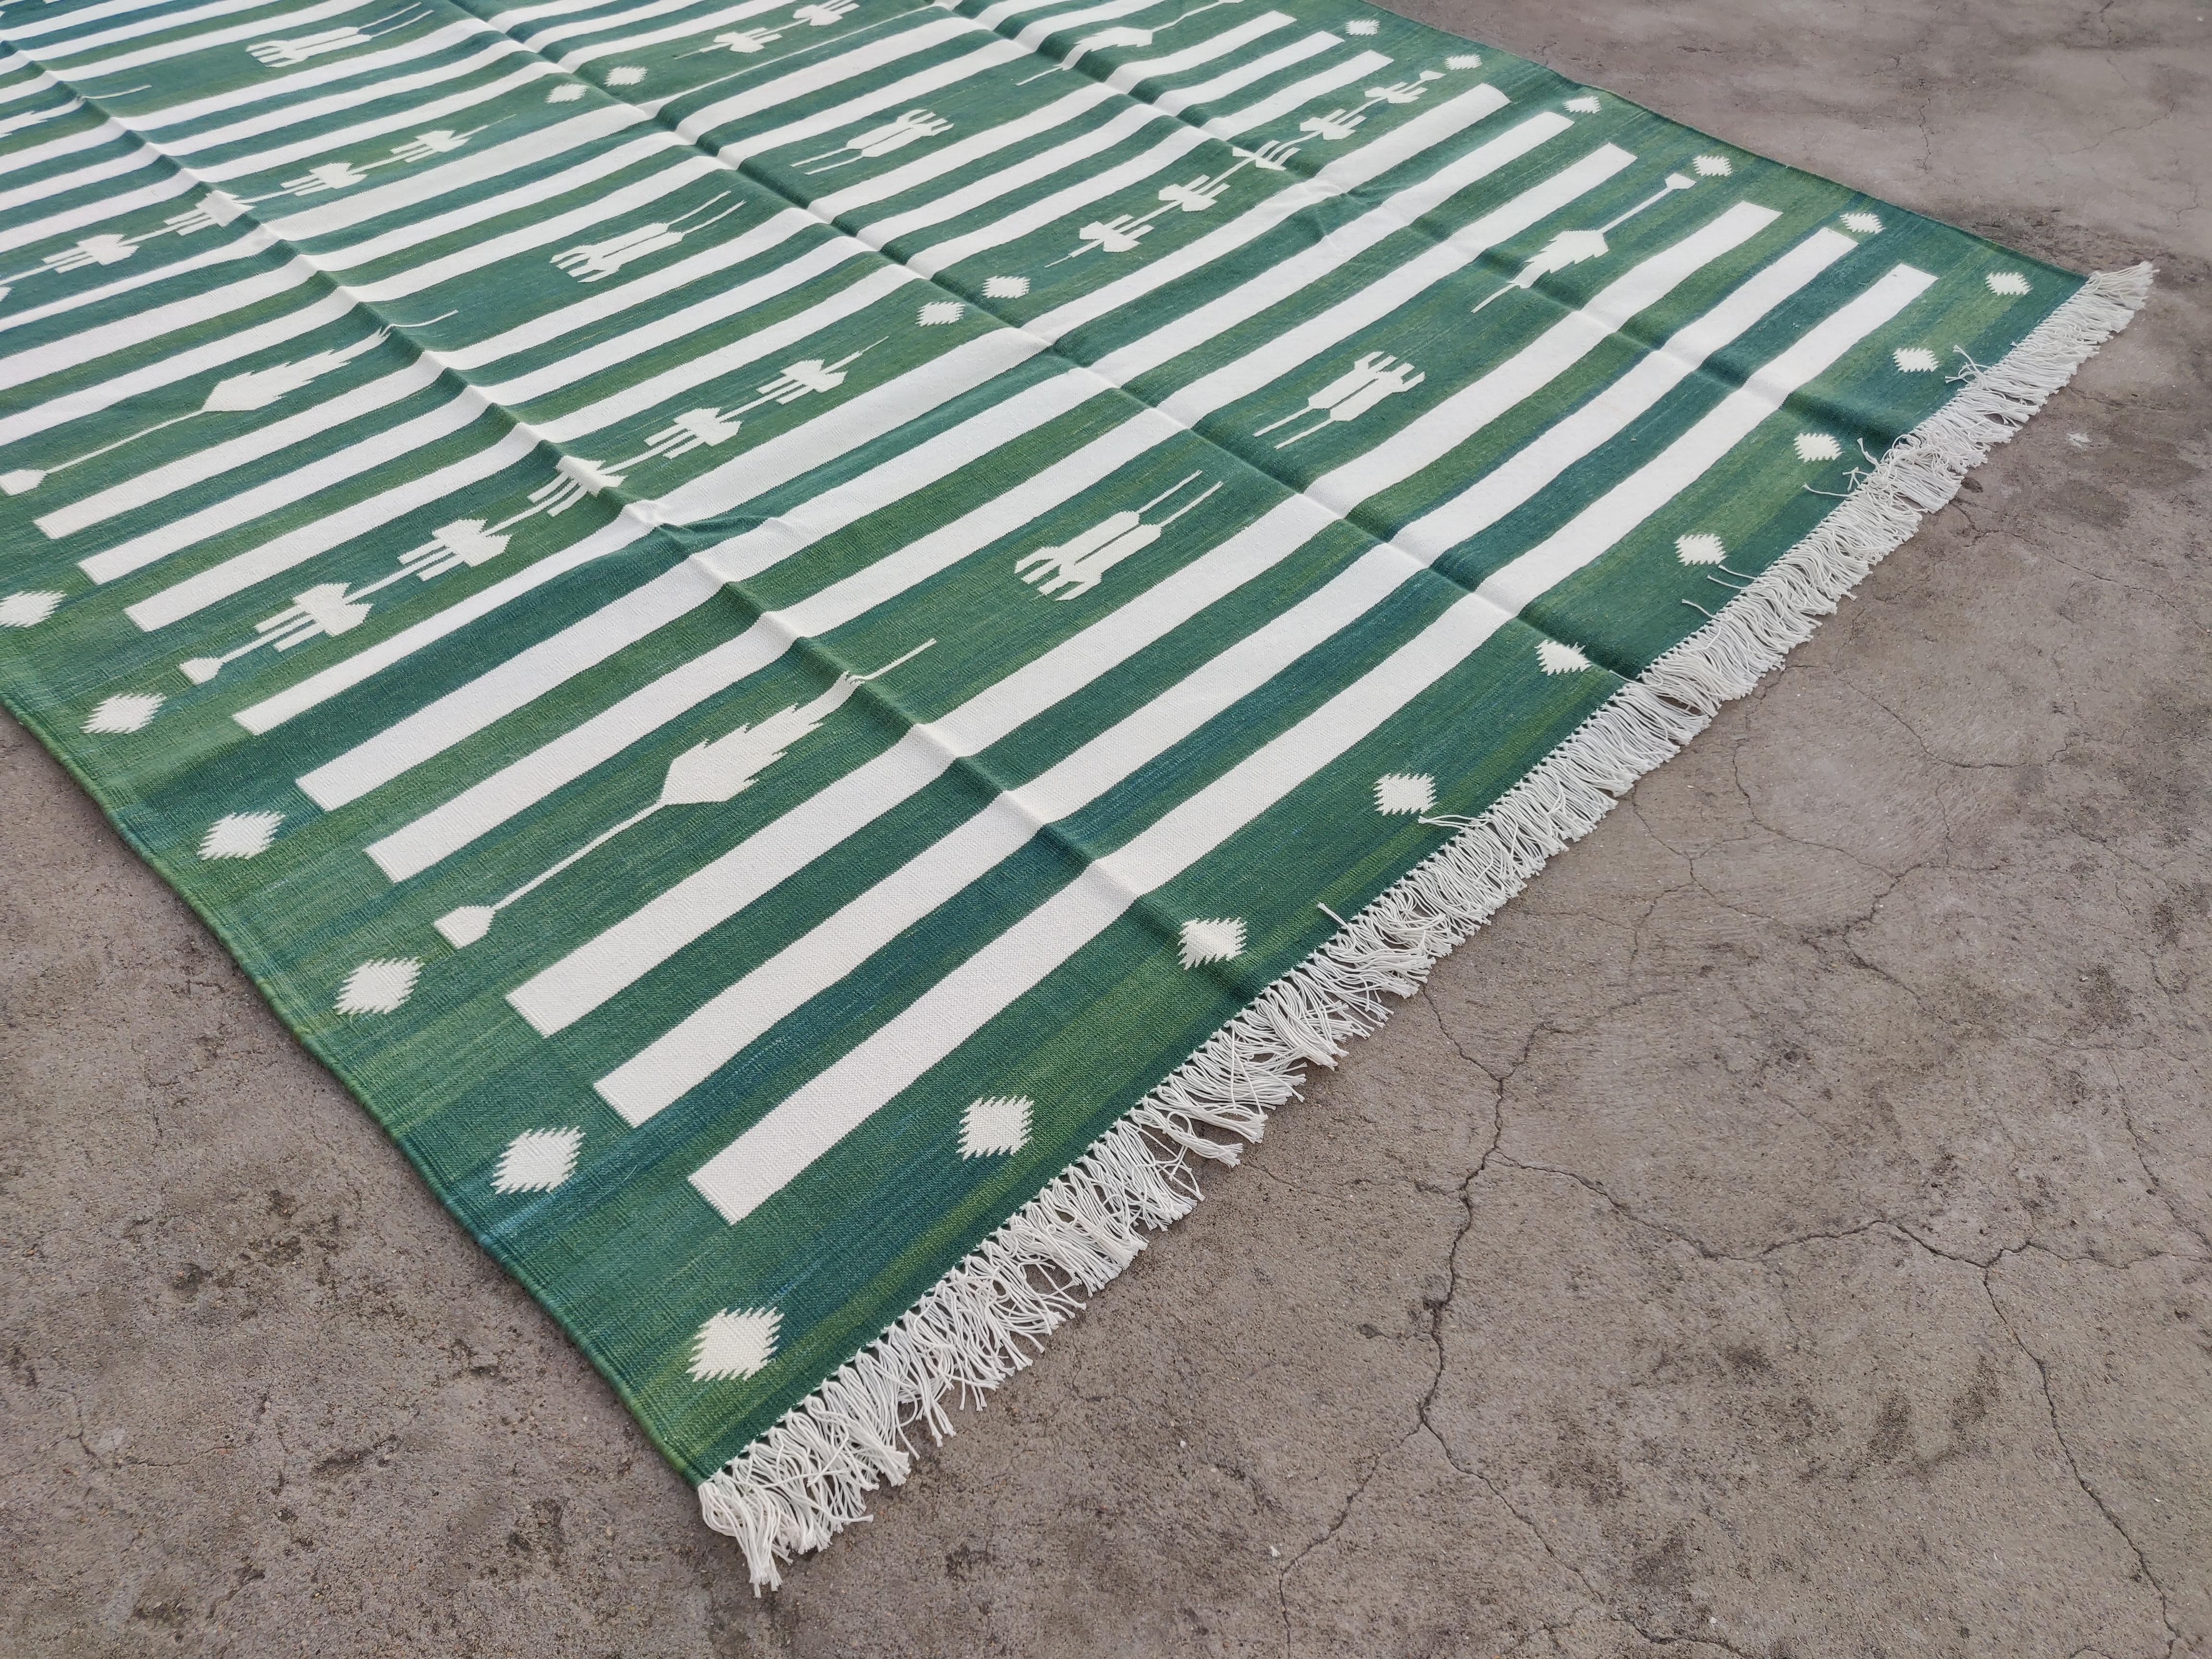 Hand-Woven Handmade Cotton Area Flat Weave Rug, 6x9 Green And White Striped Indian Dhurrie For Sale